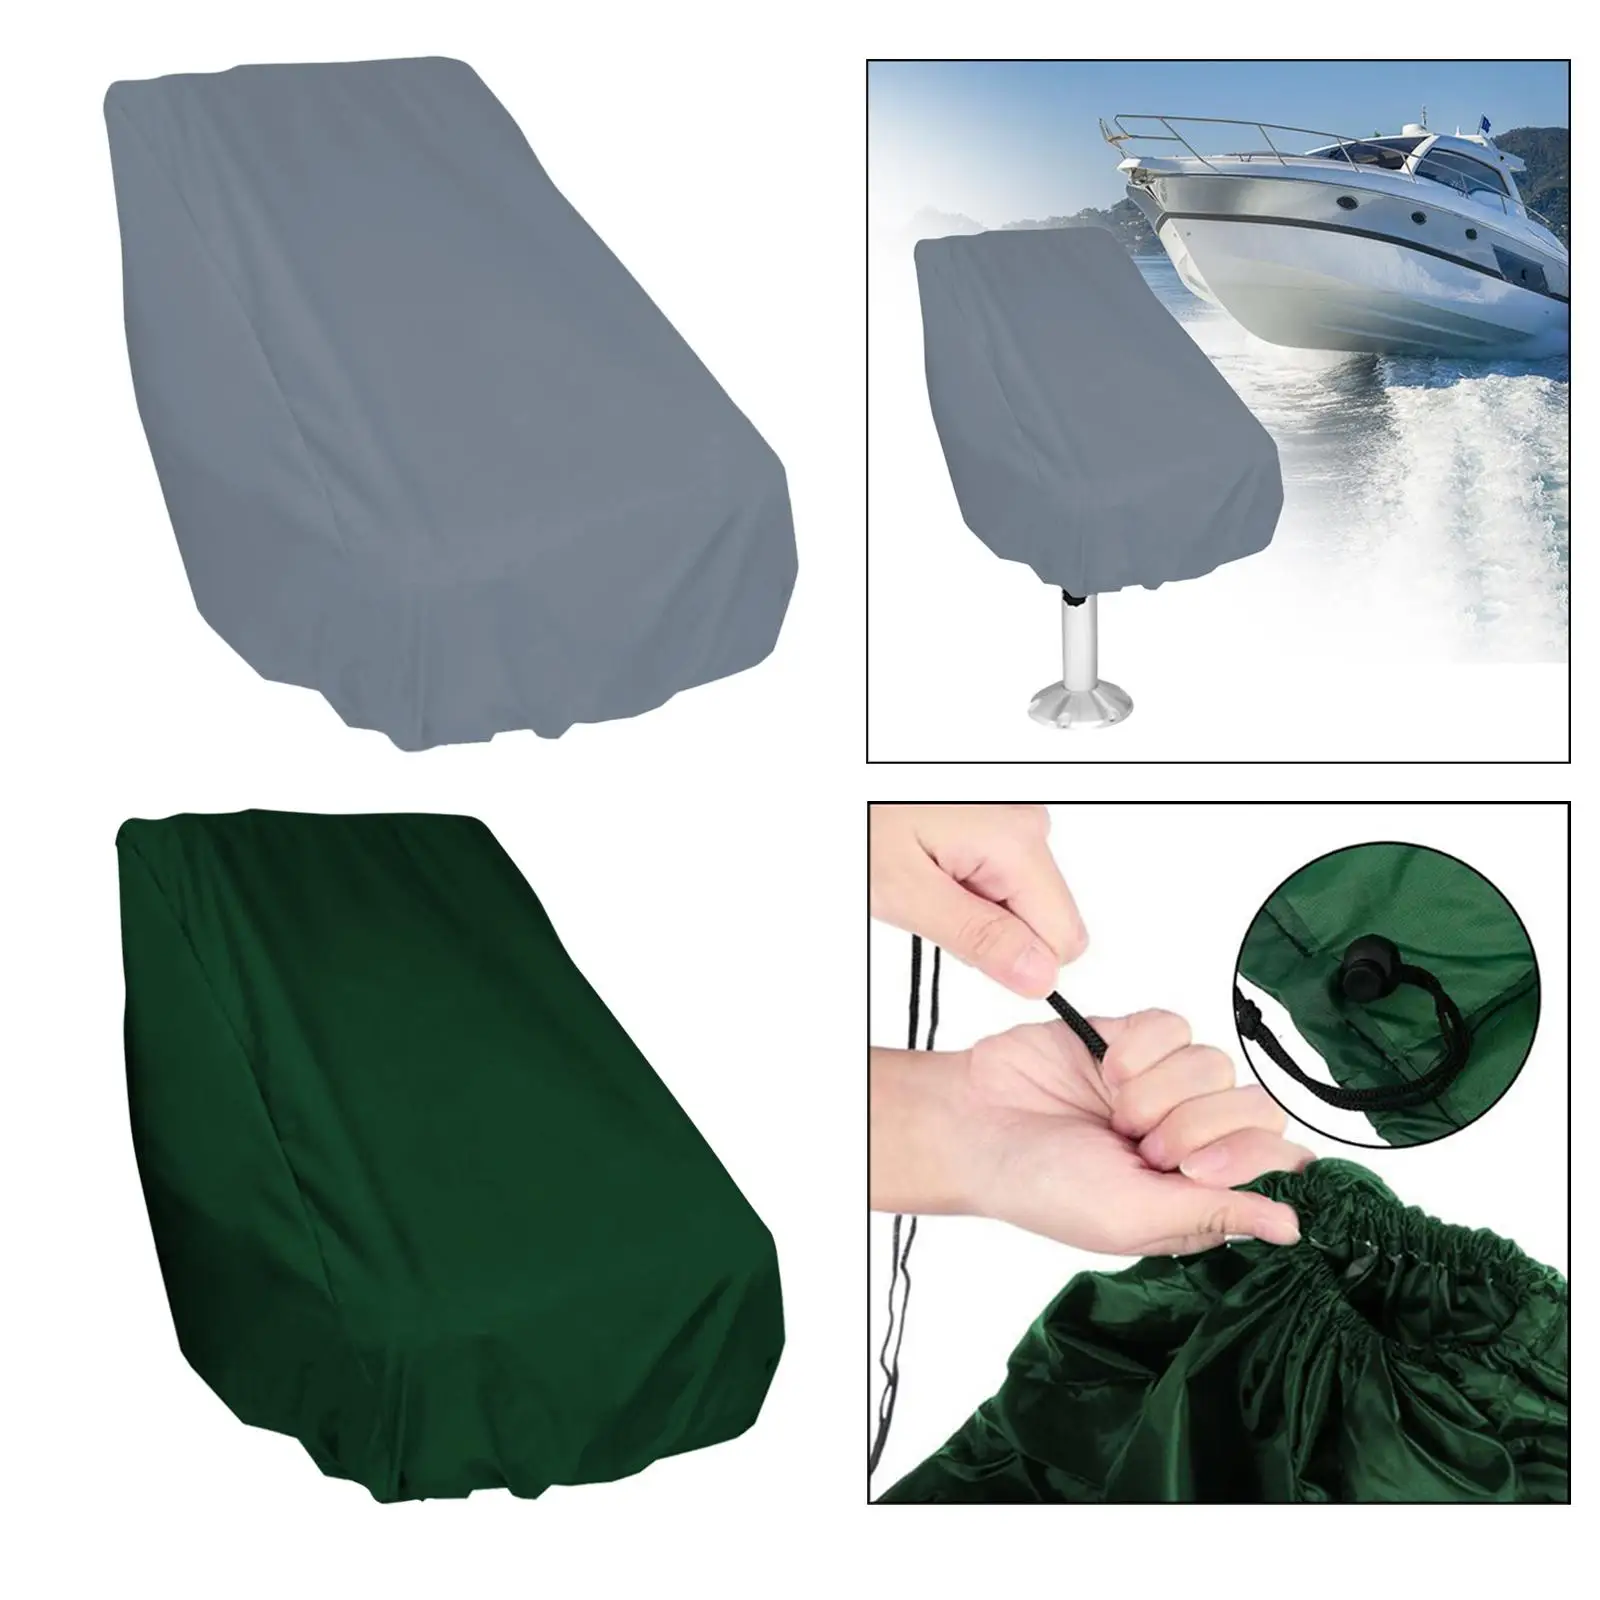 Boat Seat Cover Heavy Duty 210D Oxford Cloth Boat Chair Seat Cover Outdoor